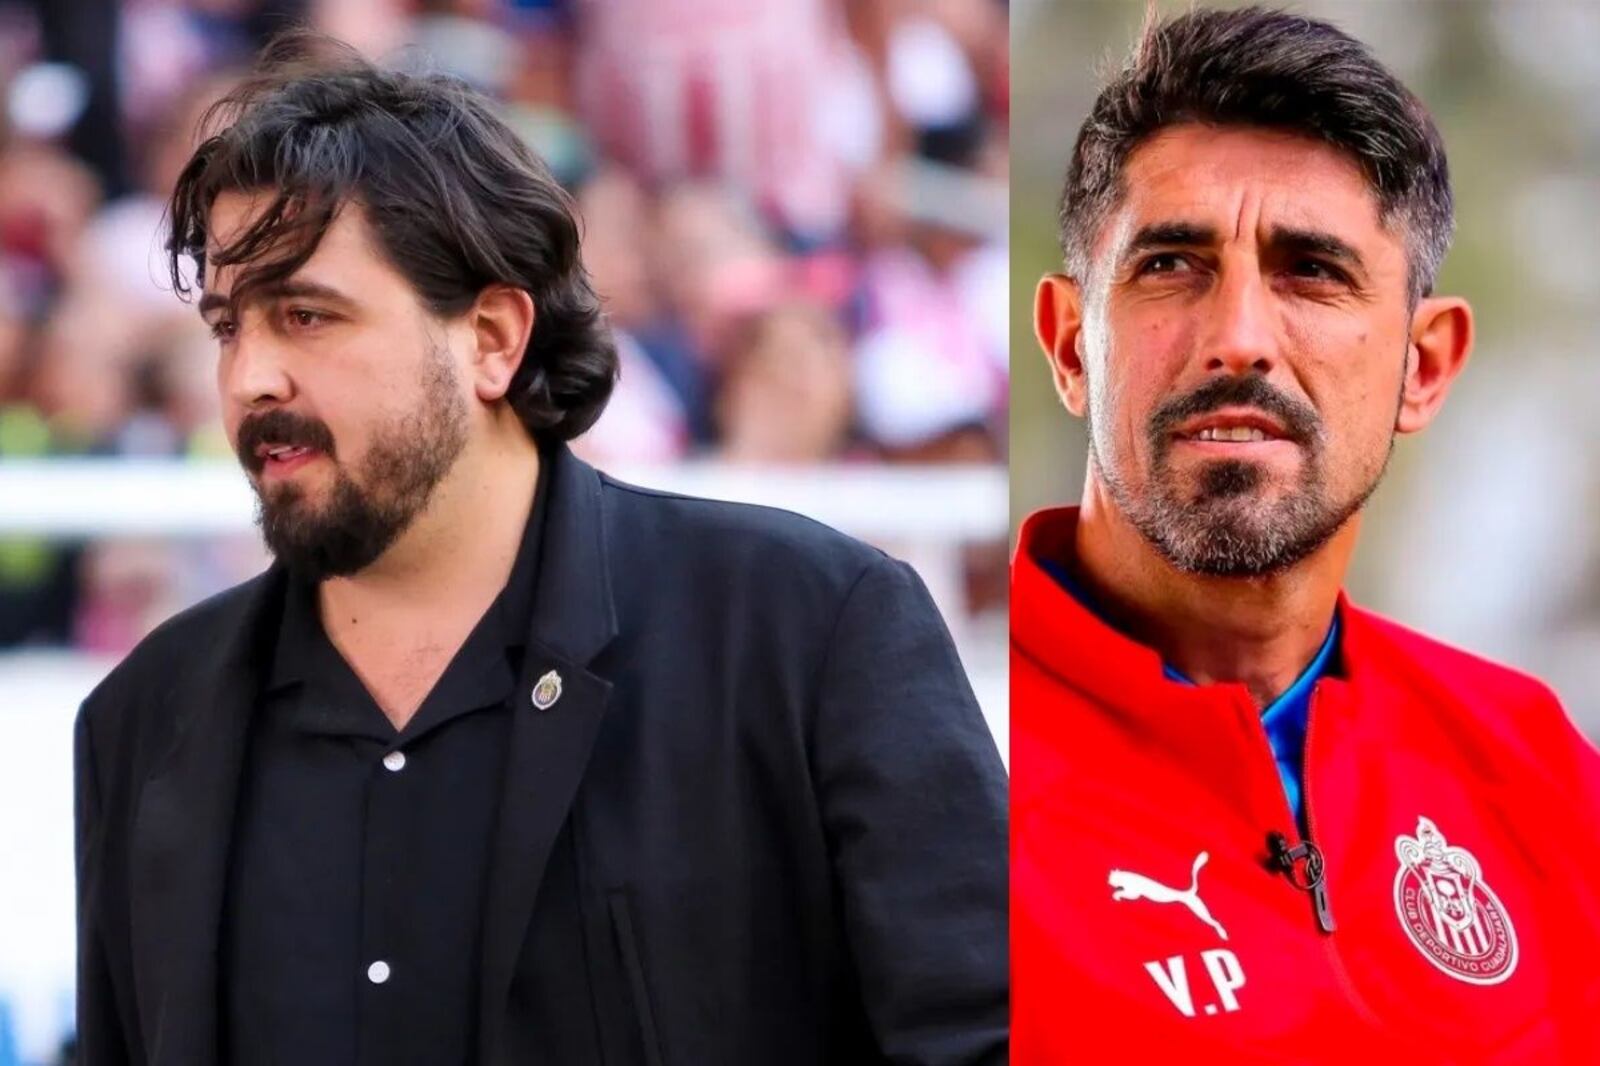 The decision that Amaury Vergara made with Paunovic due to the poor results in Chivas